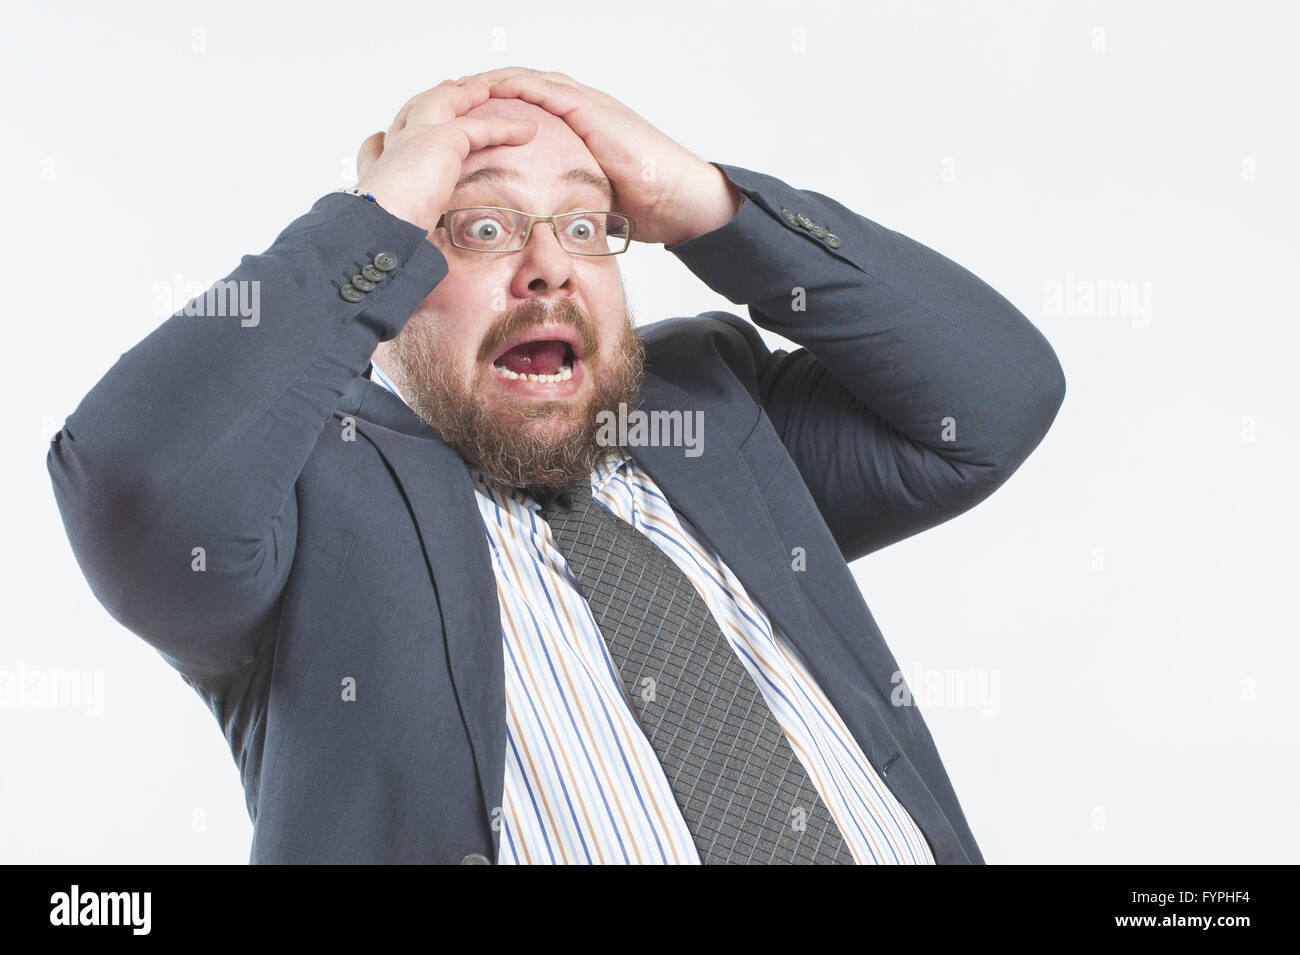 The man screams in horror holding his head. Stock Photo